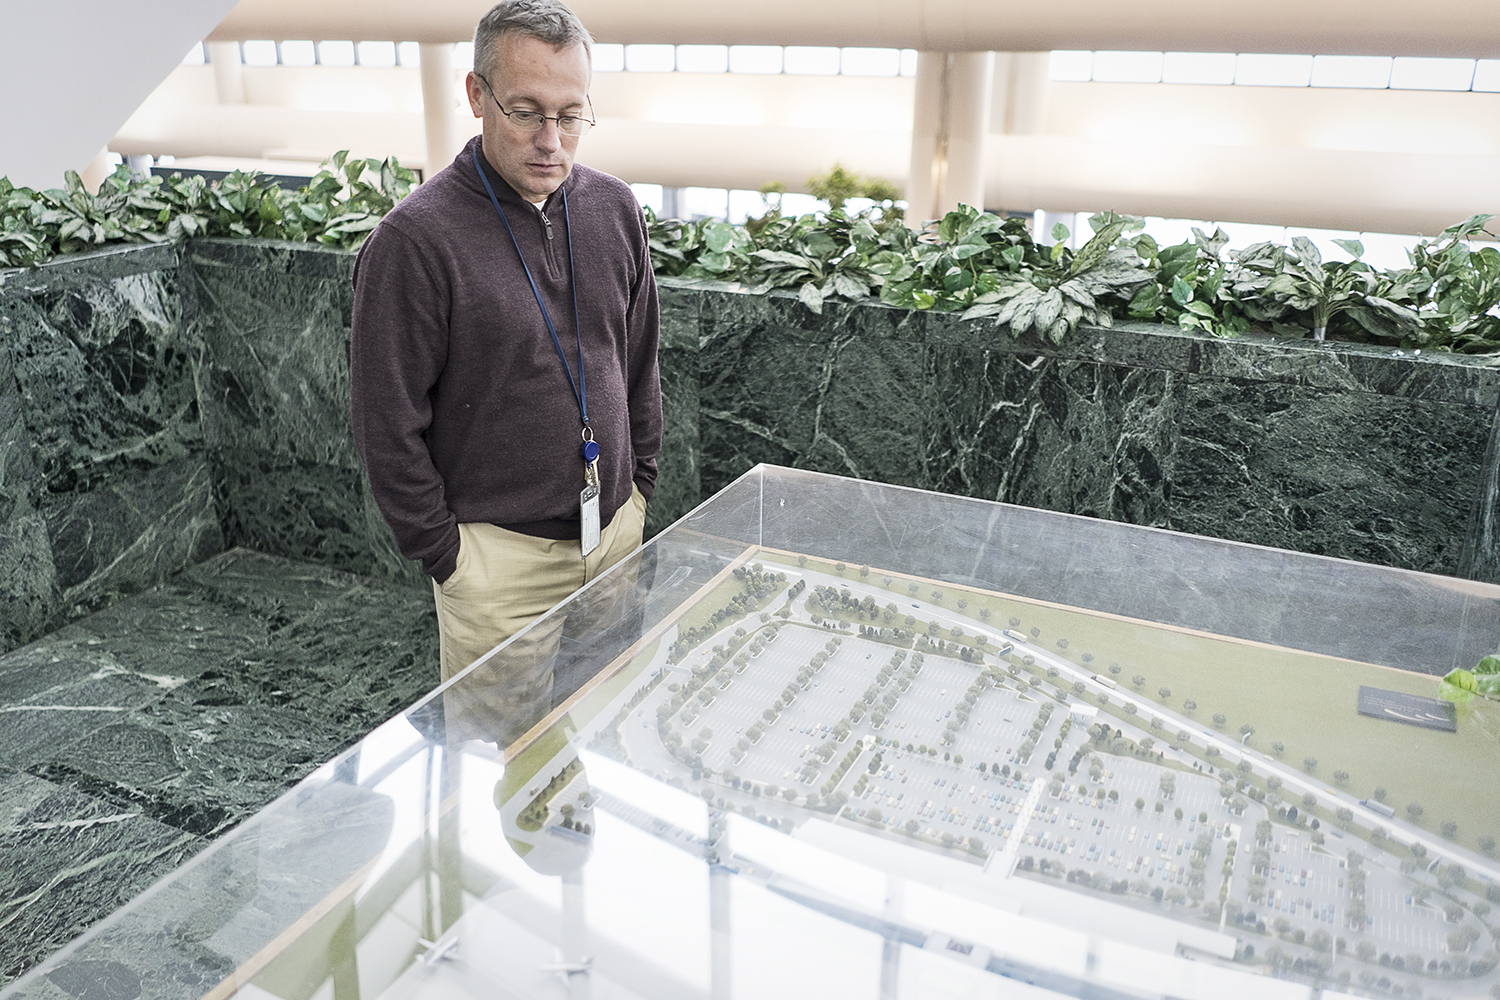 Bishop International Airport Director Craig Williams, 48, of Fenton, looks at the scale model of Bishop as it was envisioned in the early 1990s. Remarkably, the airport has very little variation than the original proposed model.